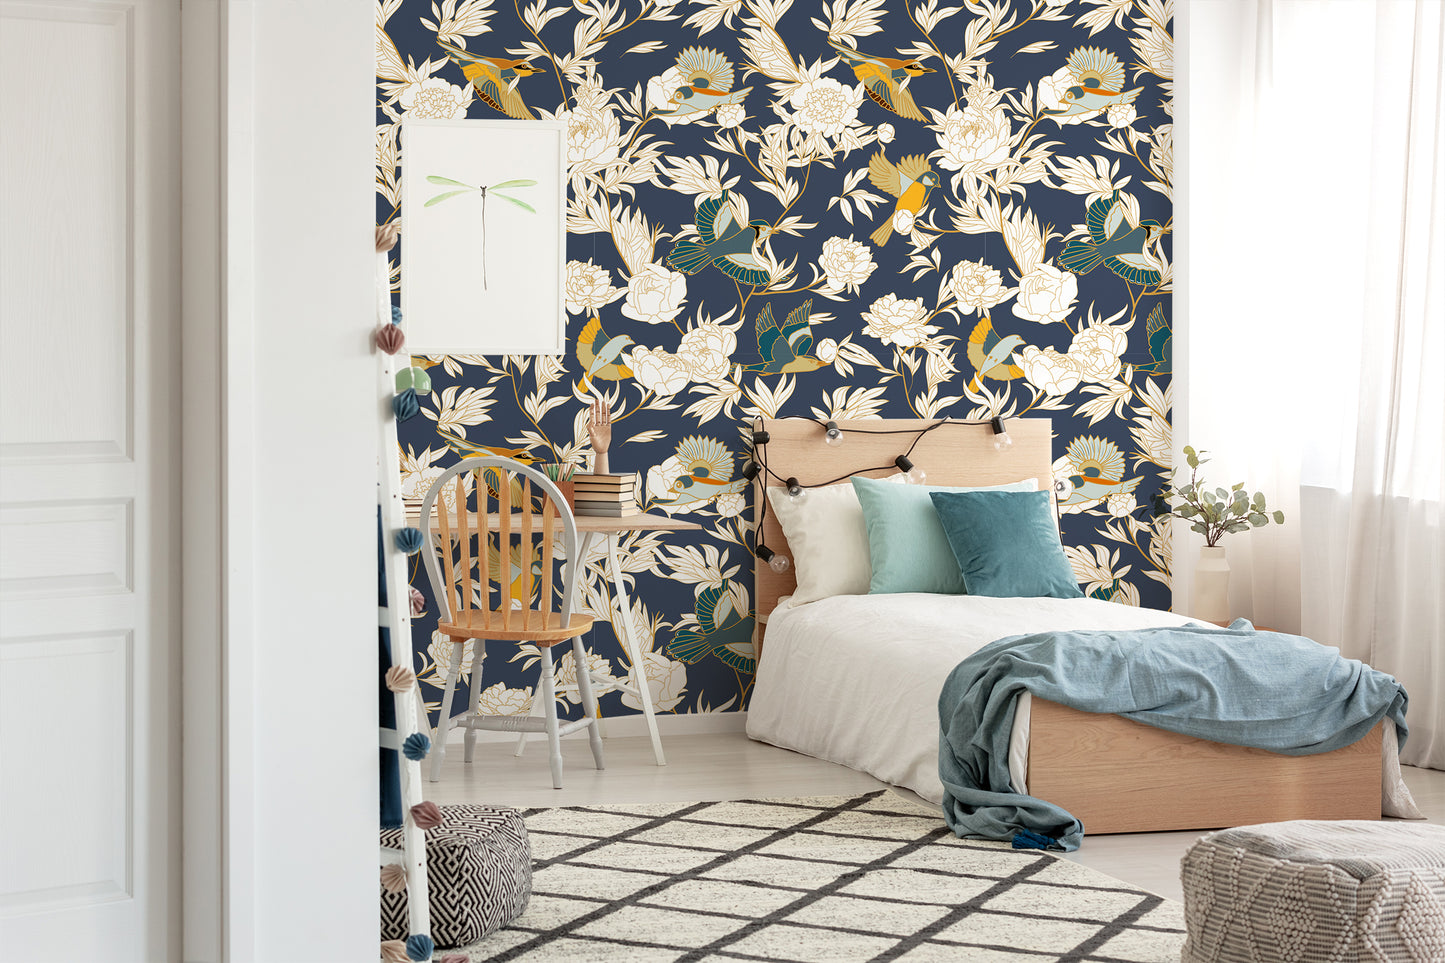 Floral Ceramic Bird Removable Peel And Stick Wallpaper